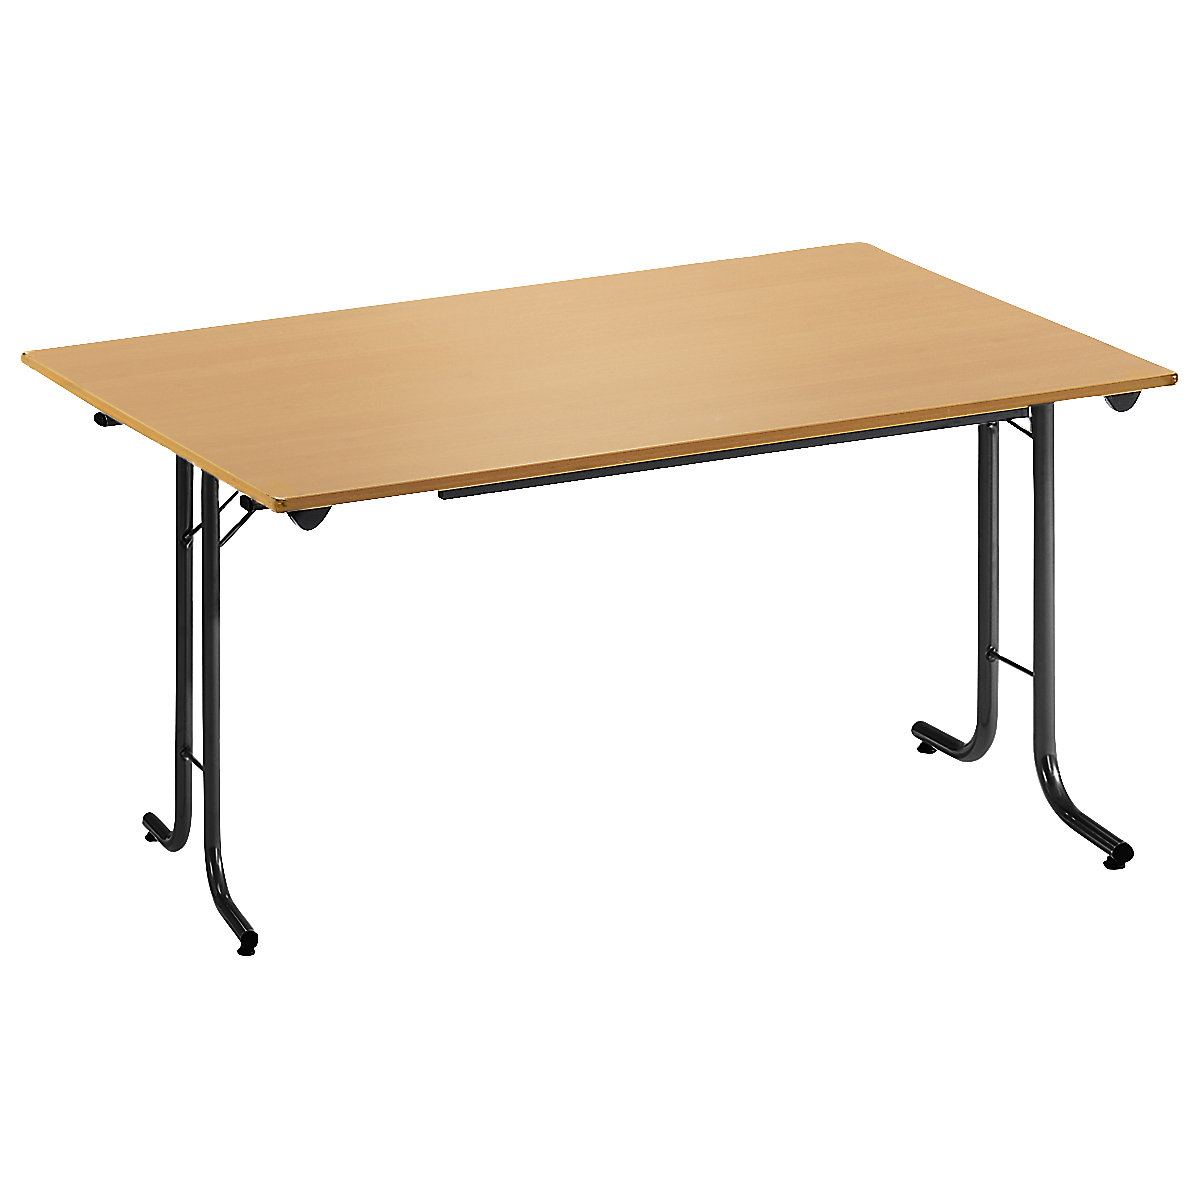 Folding table, with rounded edges, round tubular frame, rectangular top, 1200 x 700 mm, black frame, beech finish tabletop-12